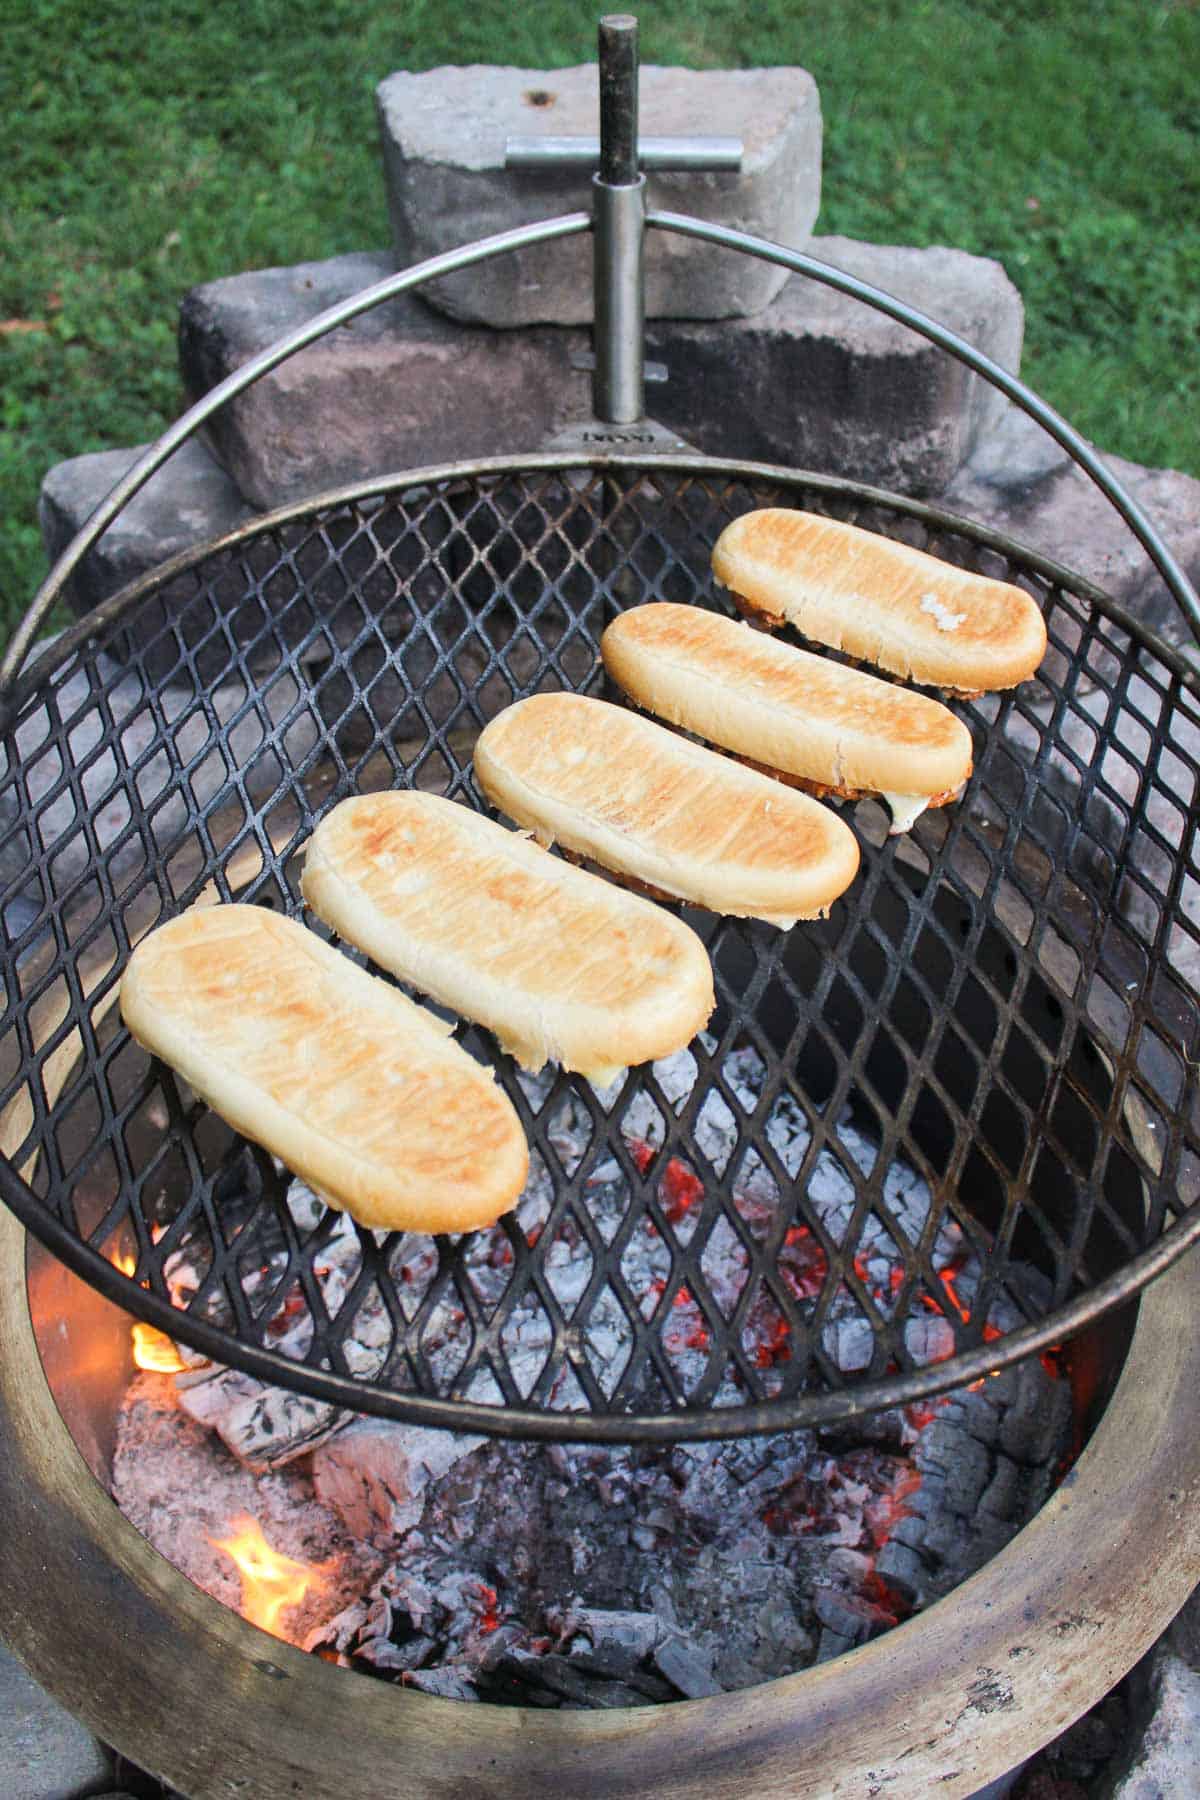 cheese stuffed choripan bottom buns being cooked face down on a grill grate